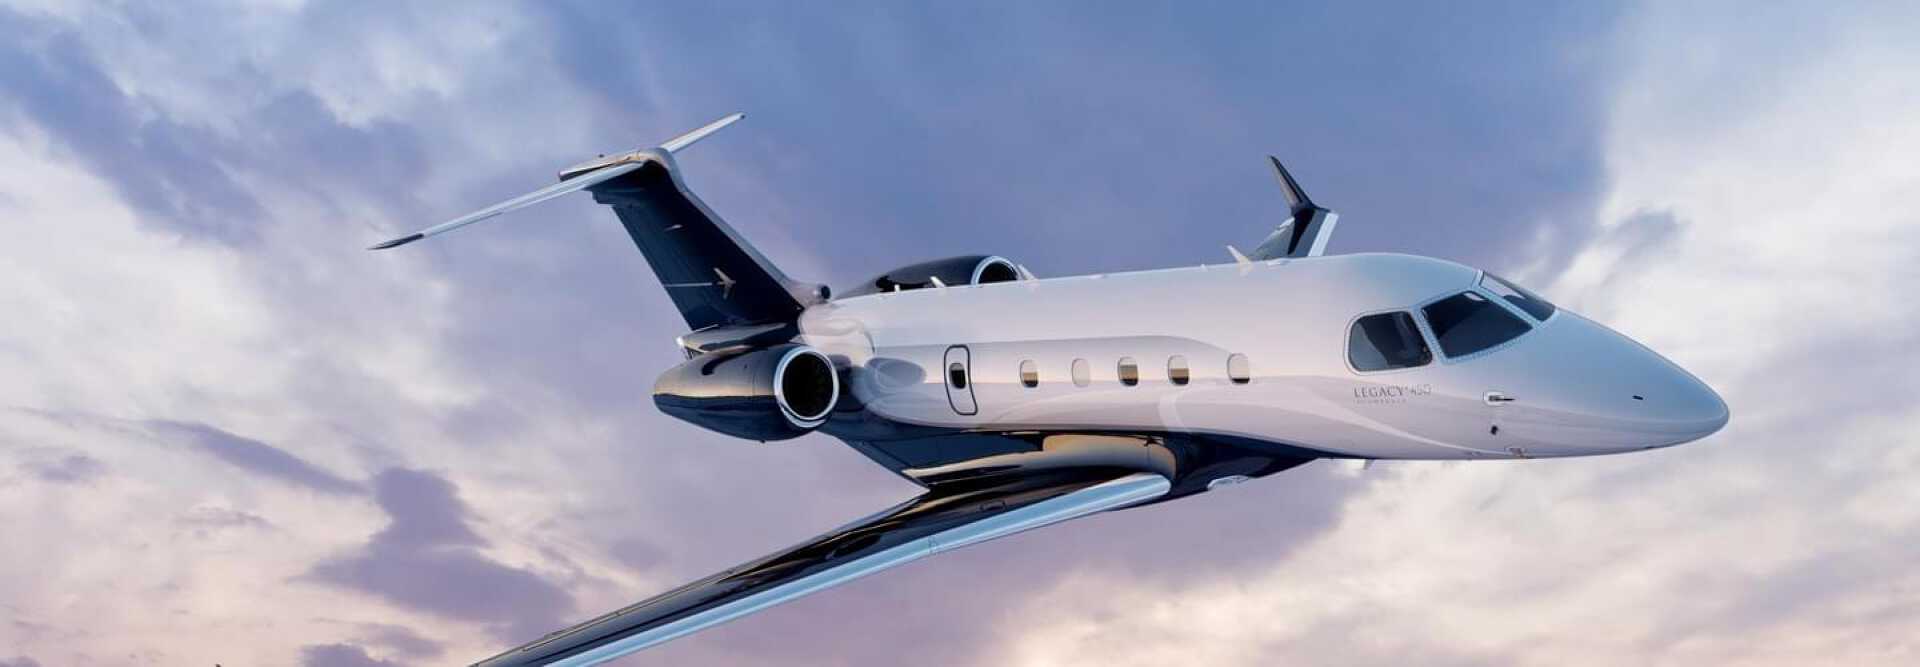 Super Light Jet Embraer Legacy 450 to charter for private flights with LunaJets, Brazilian manufacturer, increased performance and reliability